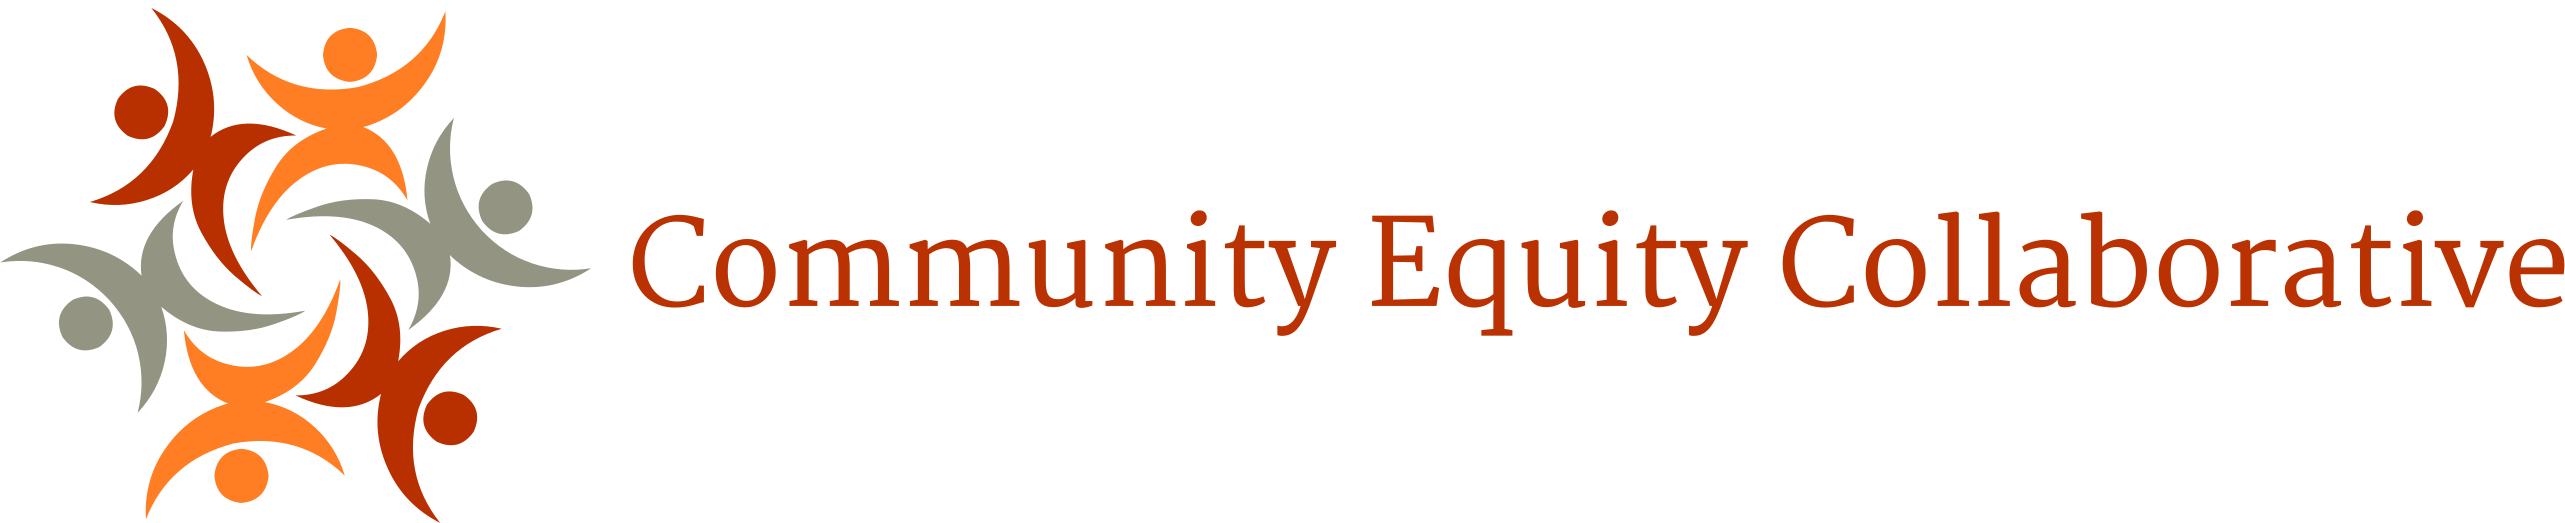 Community Equity Collaborative